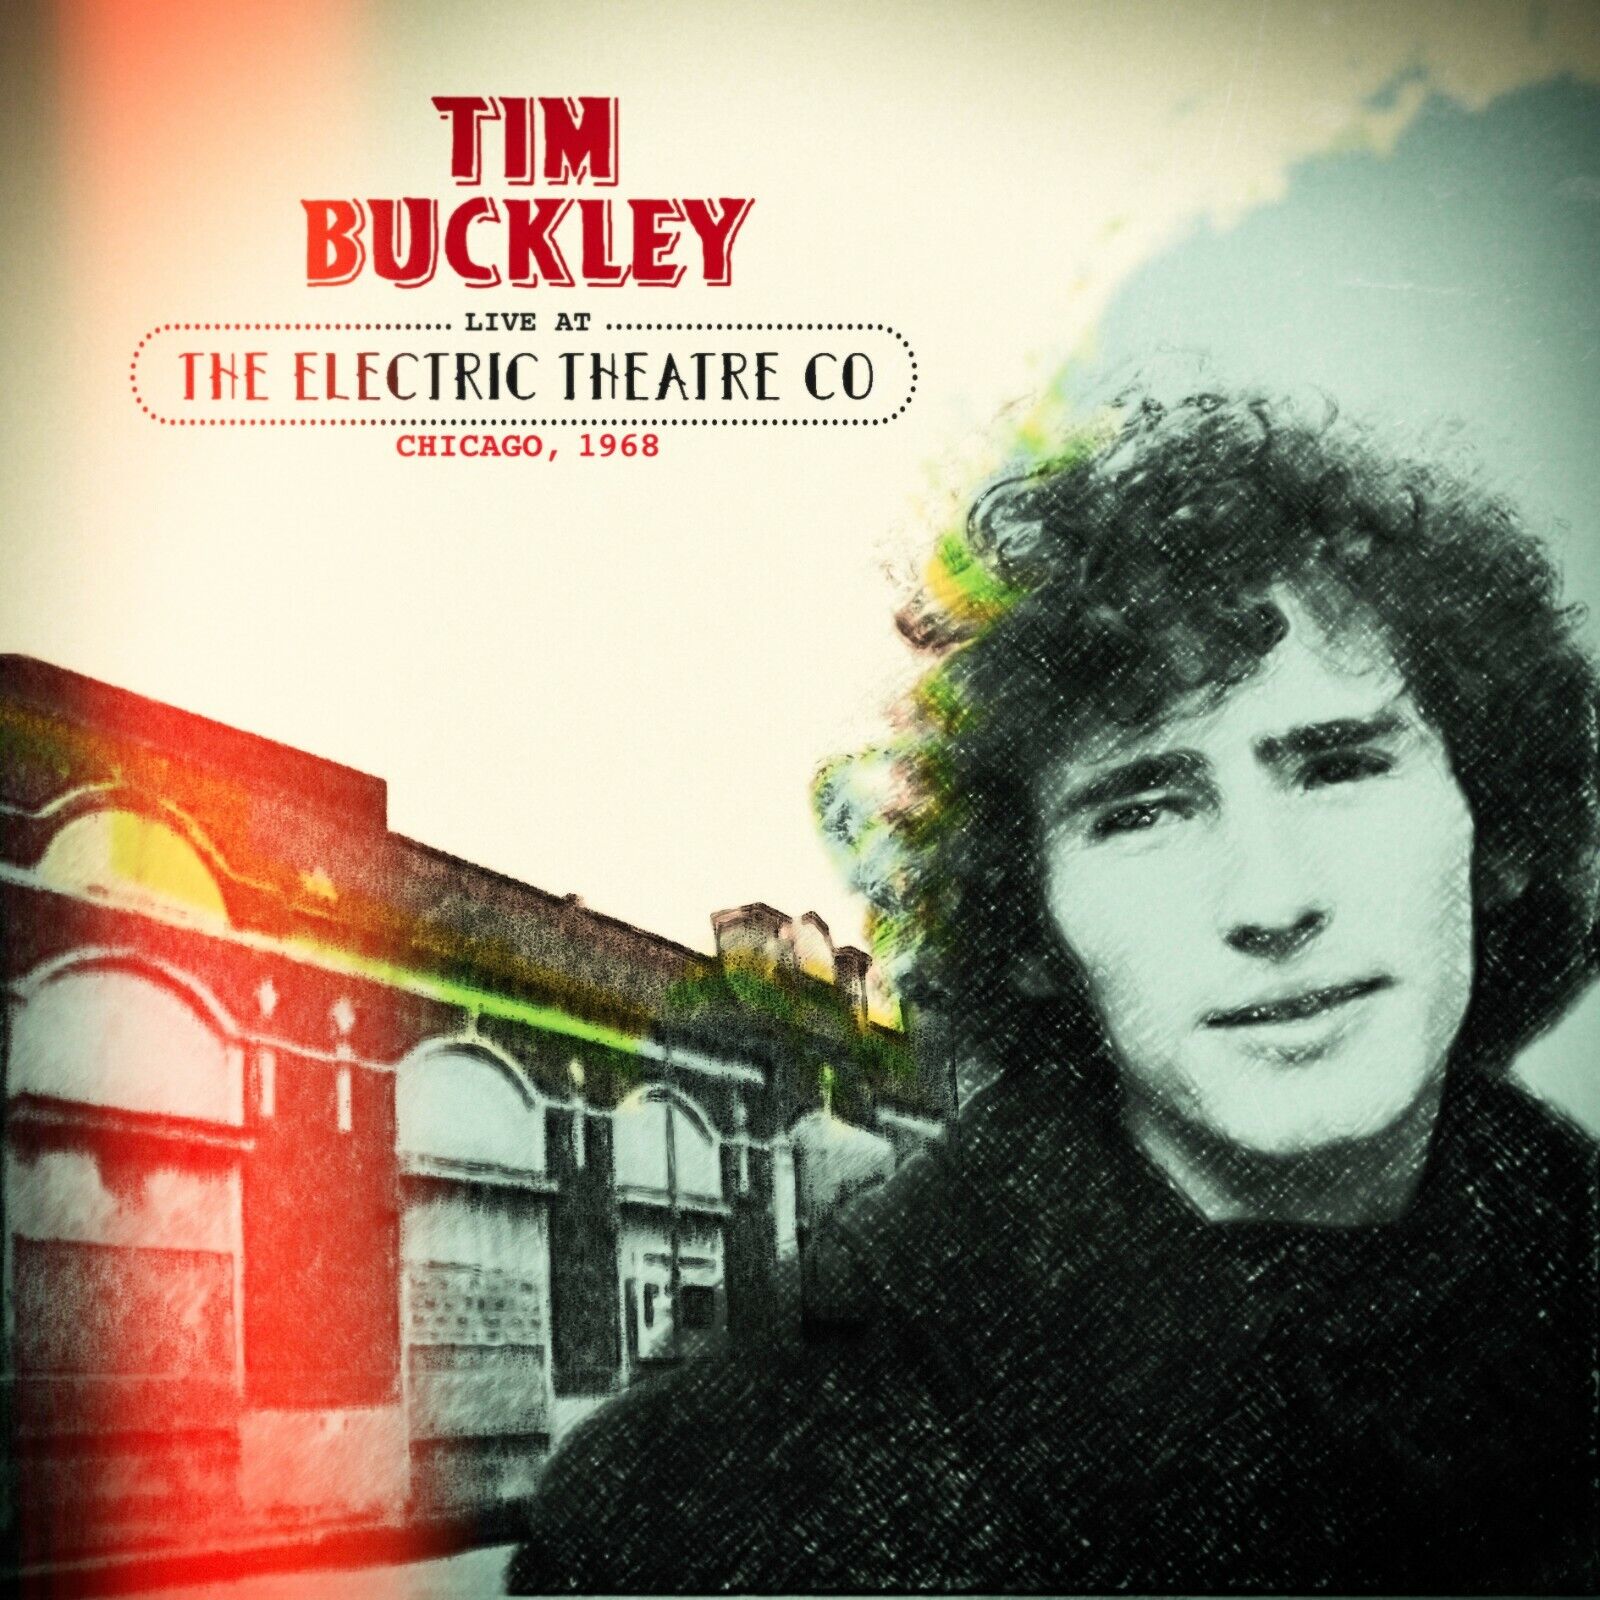 Tim Buckley - Live at the Electric Theater Co. Chicago 1968 - NEW/SEALED